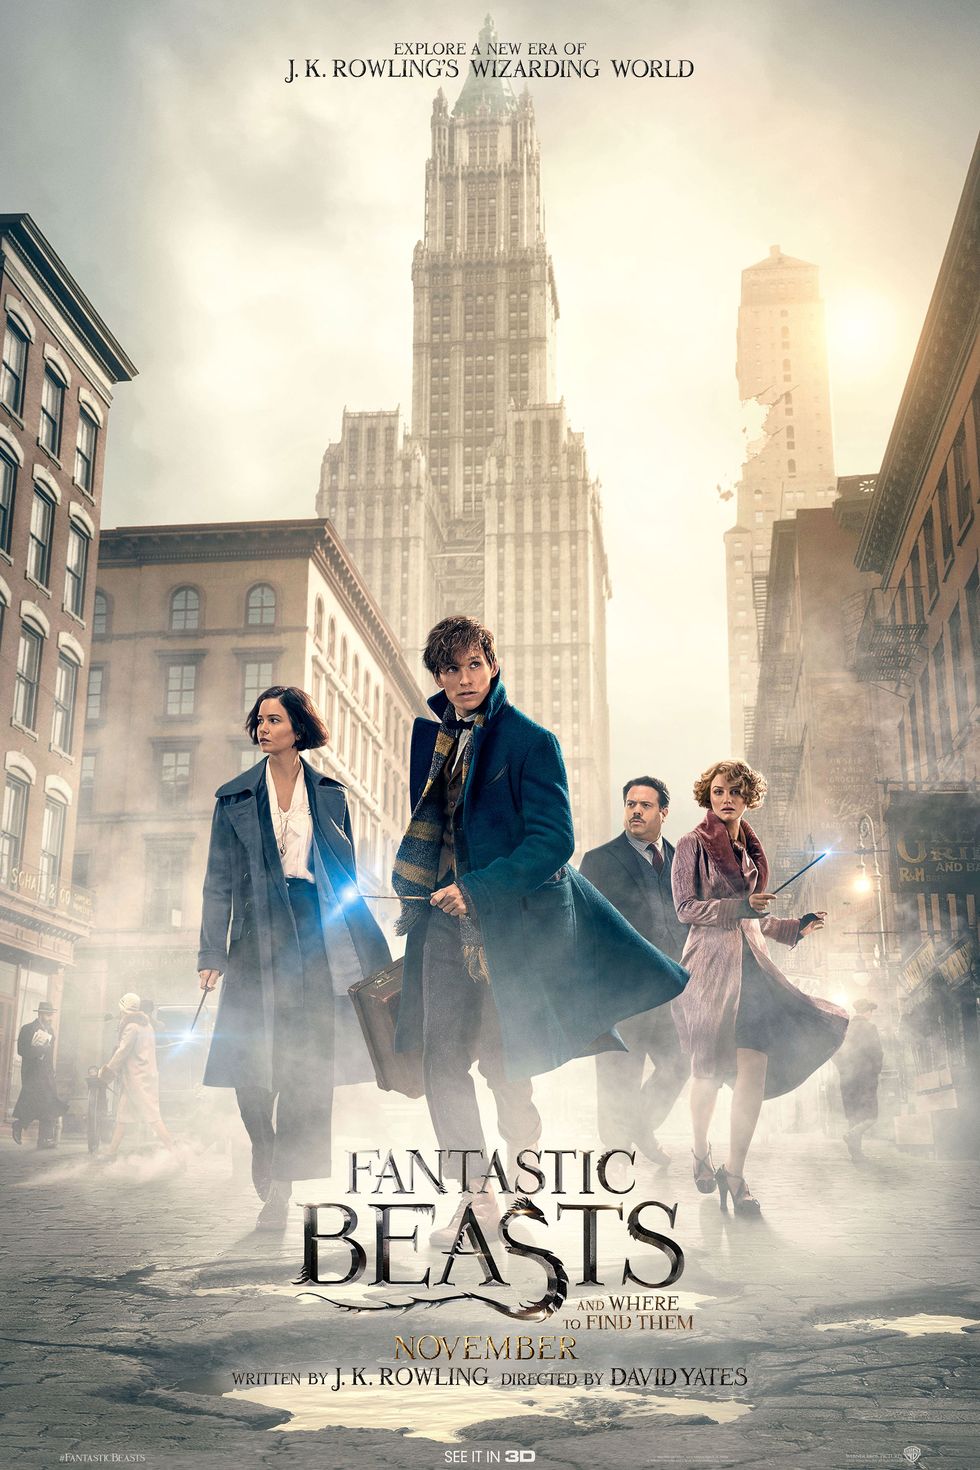 Win tickets to the Fantastic Beasts and Where to Find them premiere